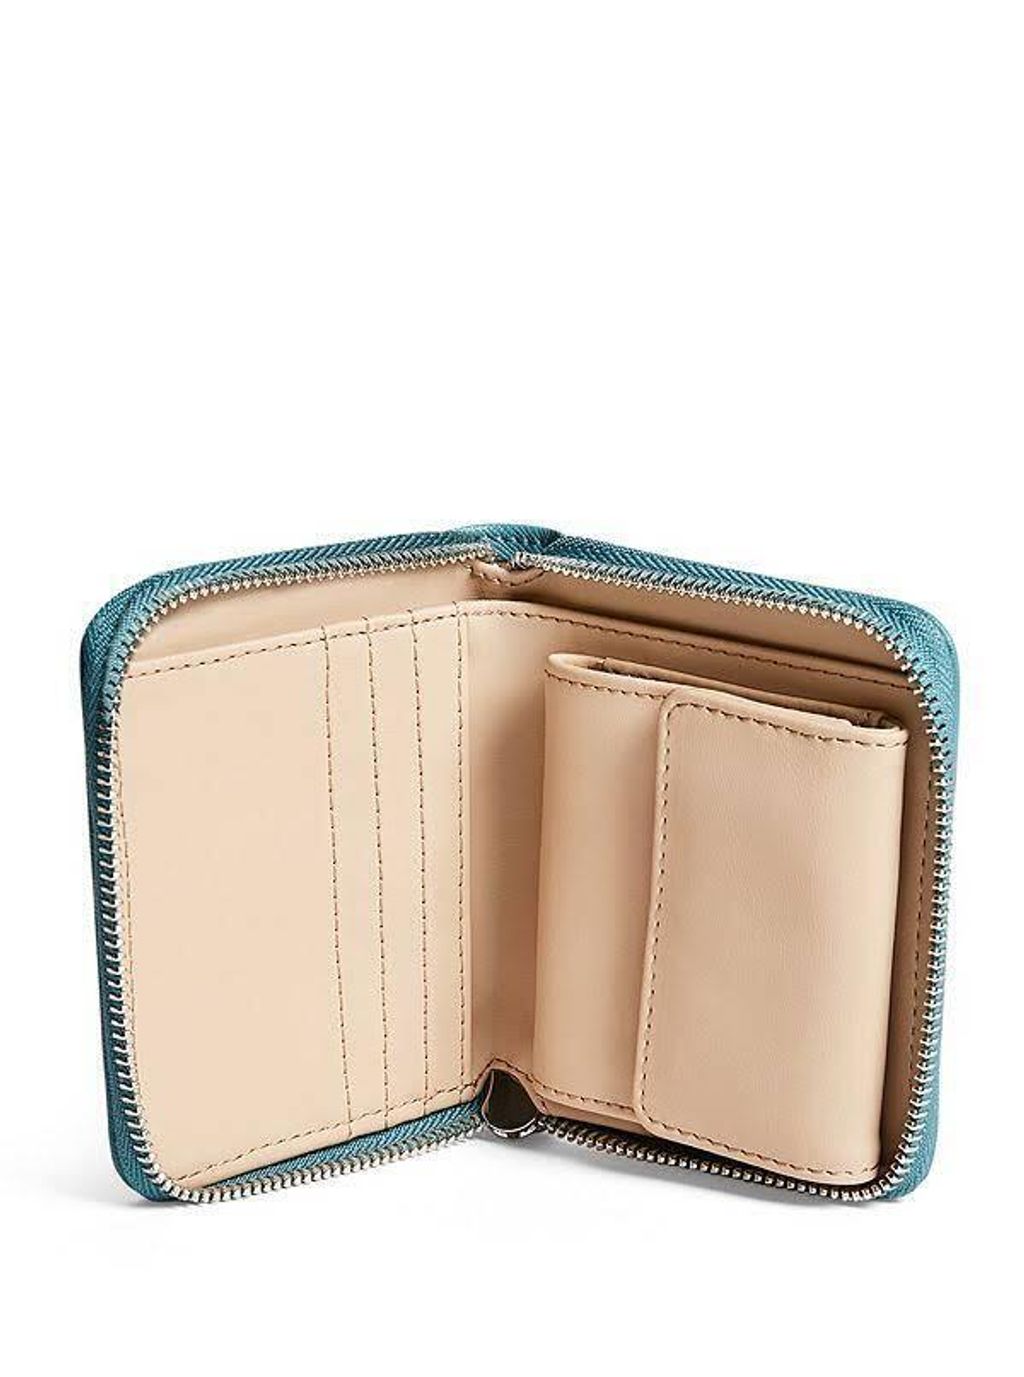 guess ABREE SMALL ZIP-AROUND WALLET $24.99 to $17 w tax for 10 2